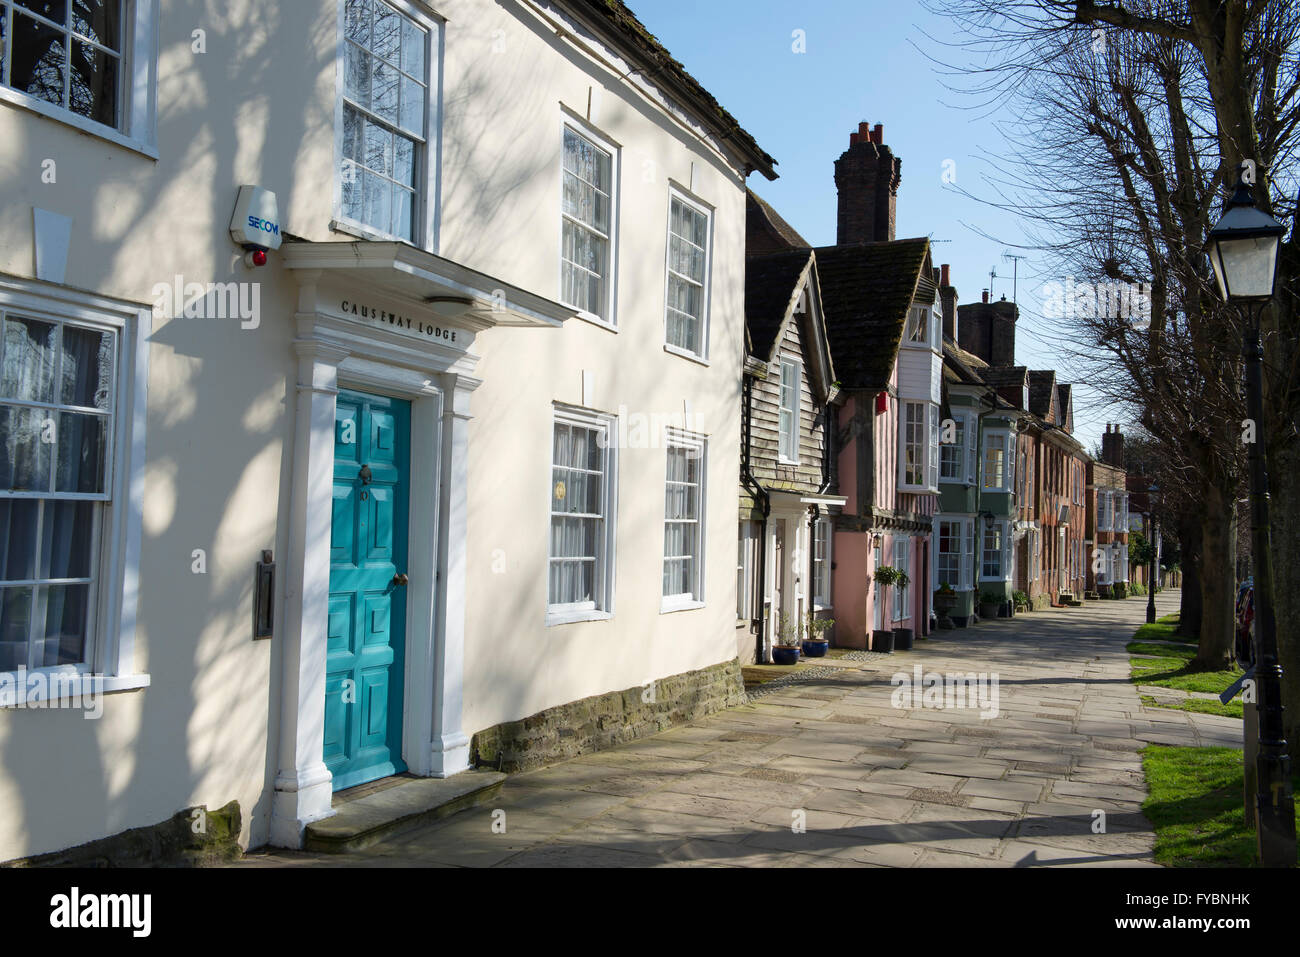 Residences on the historic thoroughfare of The Causeway in Horsham town centre, West Sussex, UK Stock Photo